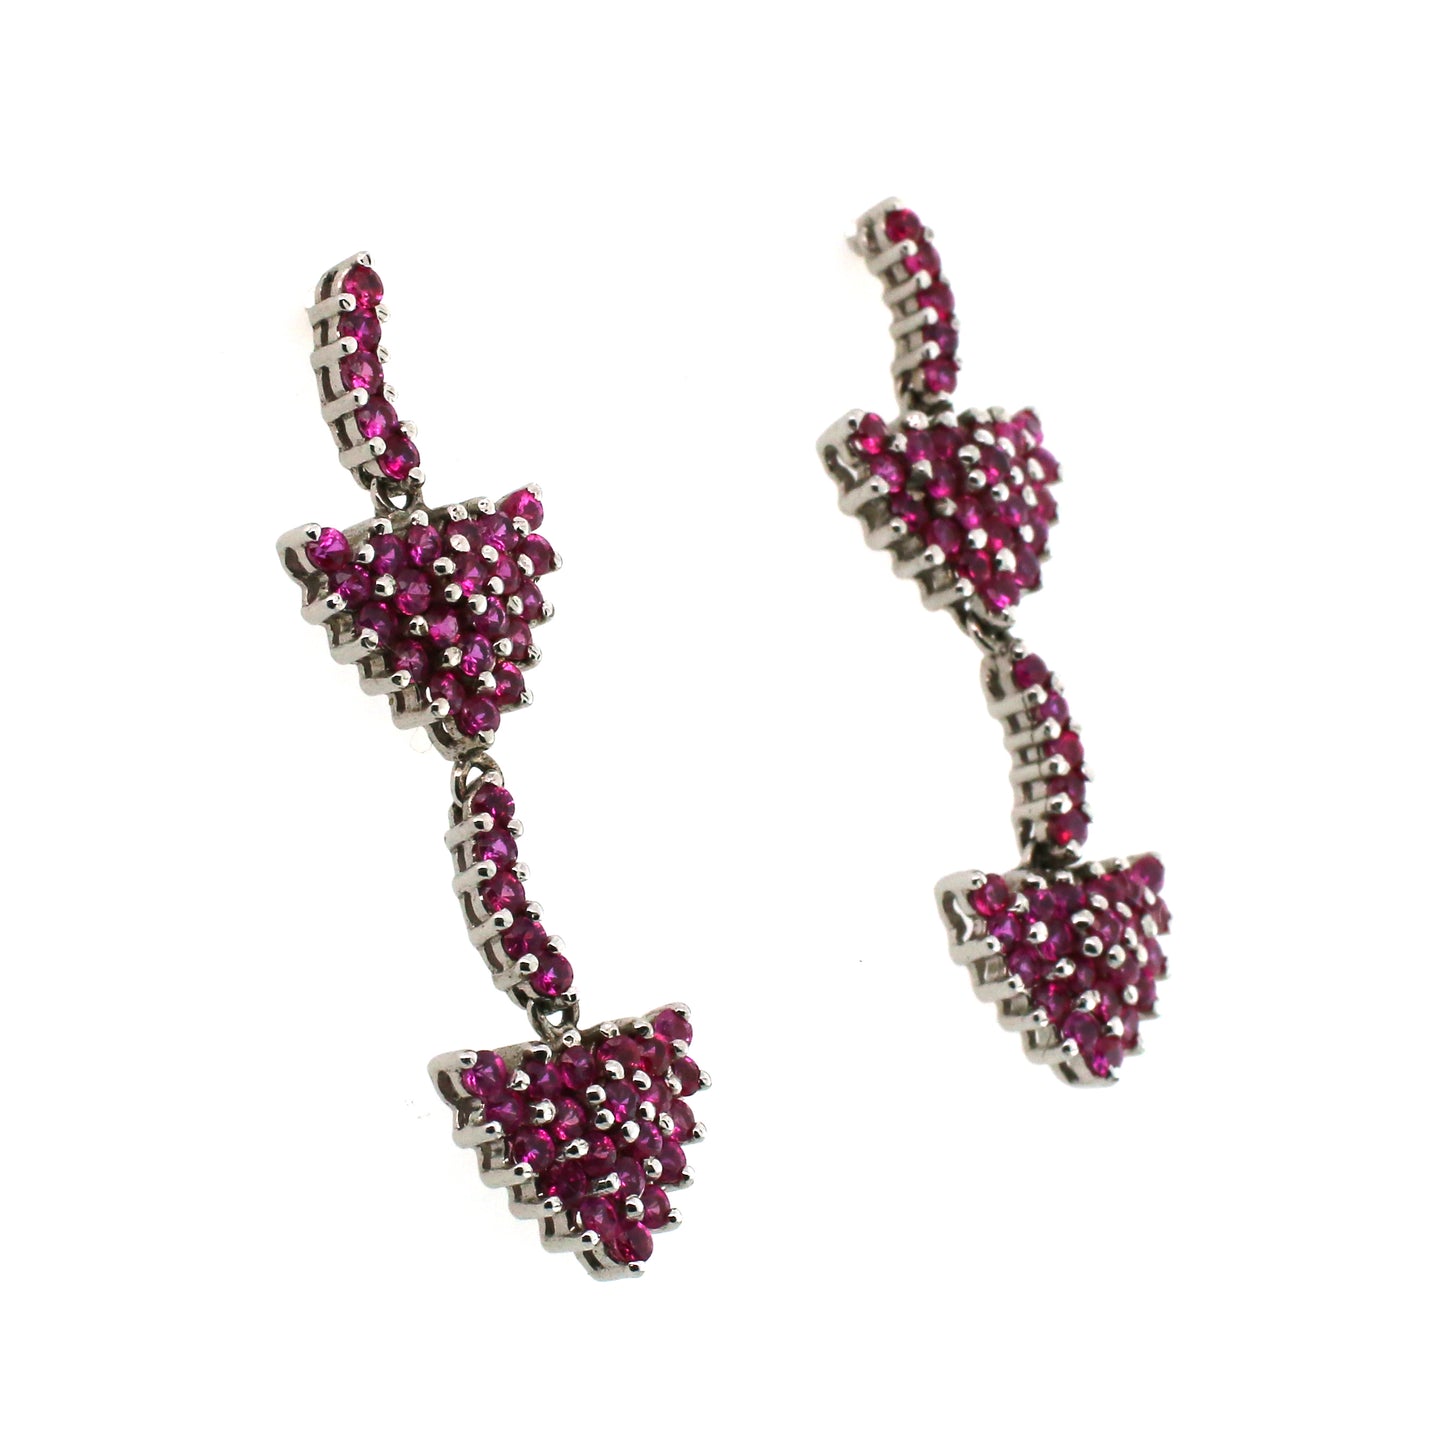 Pair of Earring Embedded with Accurate sizes of Pink Sapphire